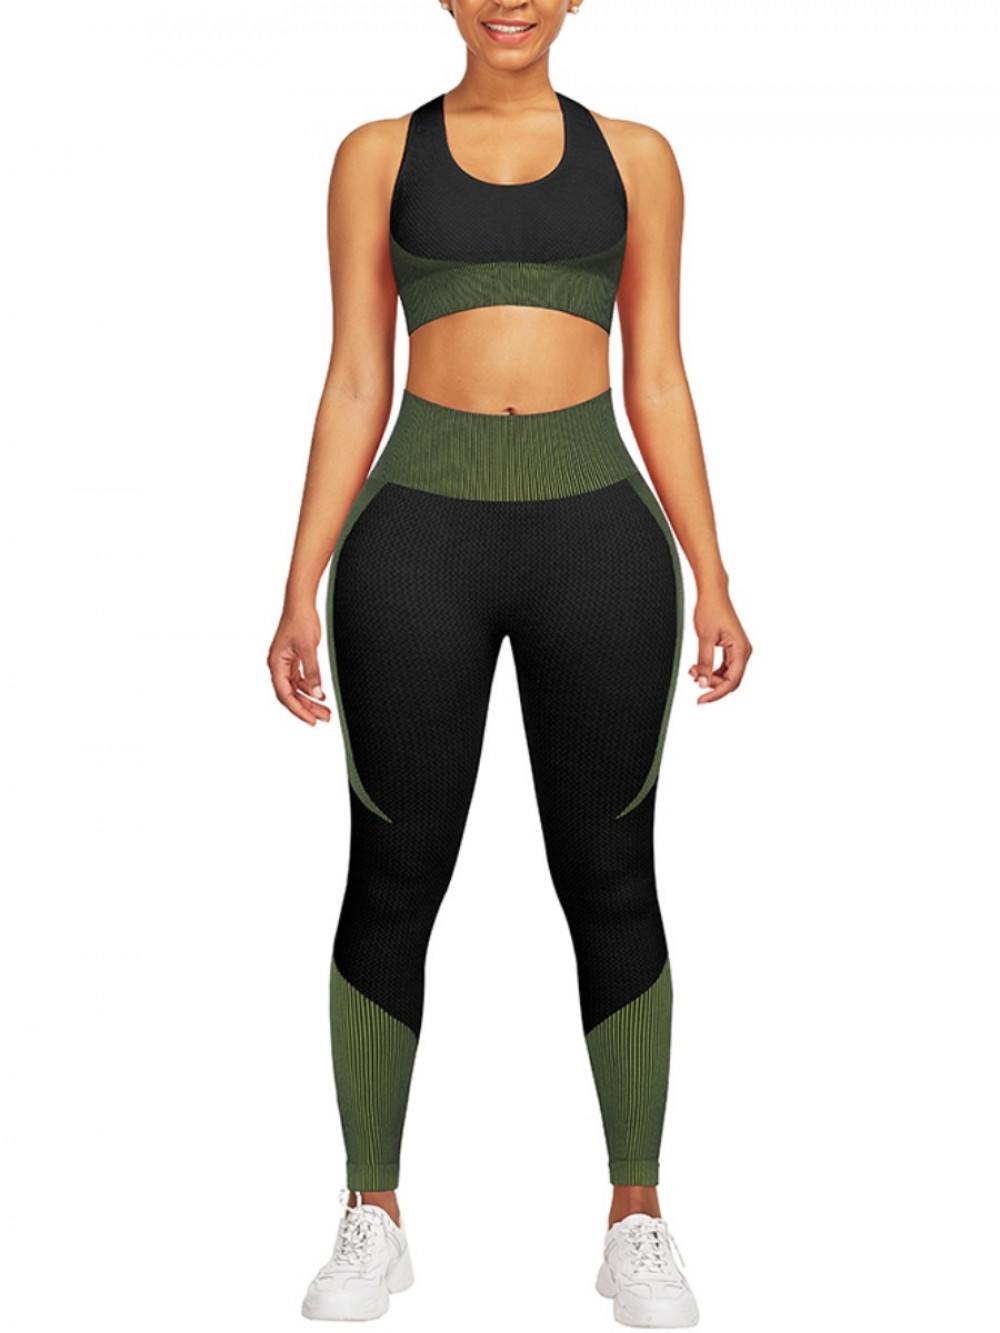 Scintillating Green Seamless Contrast Color Athletic Suit Kinetic Fashion